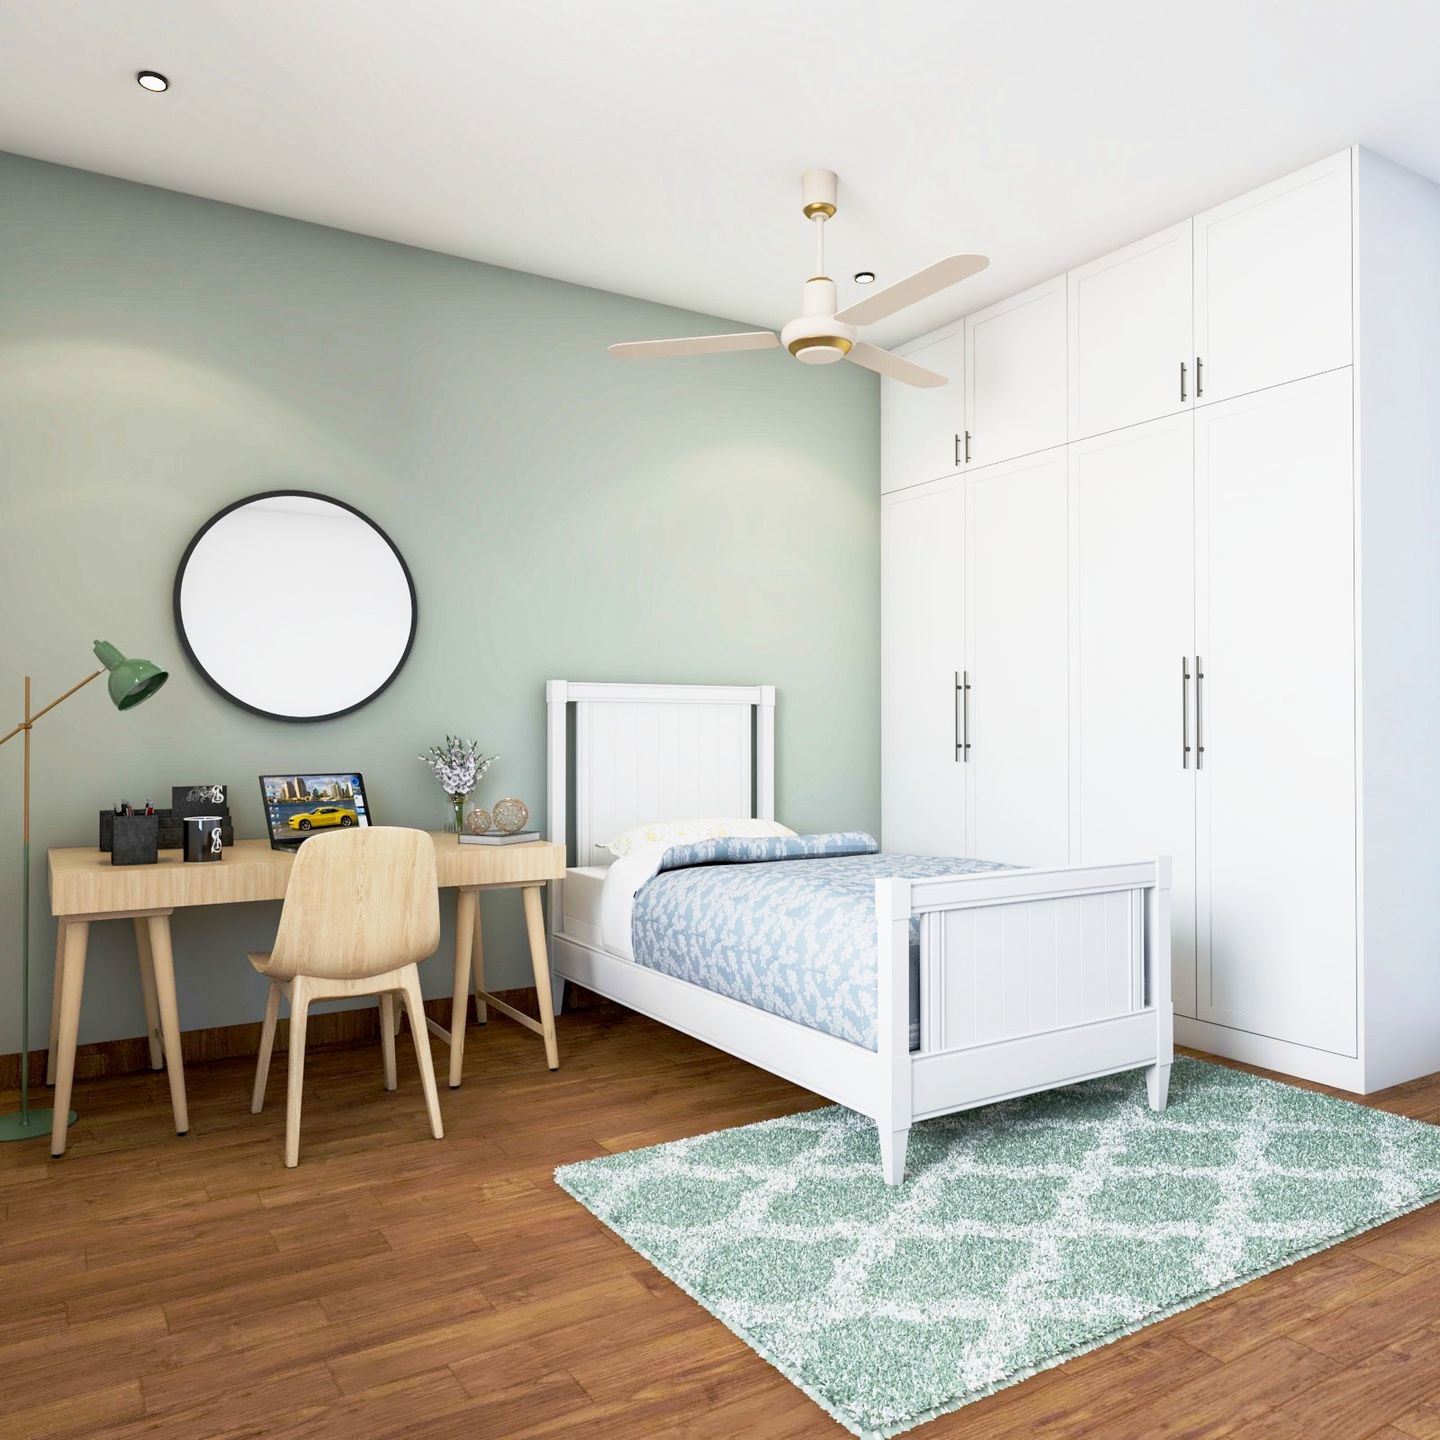 Kids Room Design With Pastel Green Accent Wall - Livspace